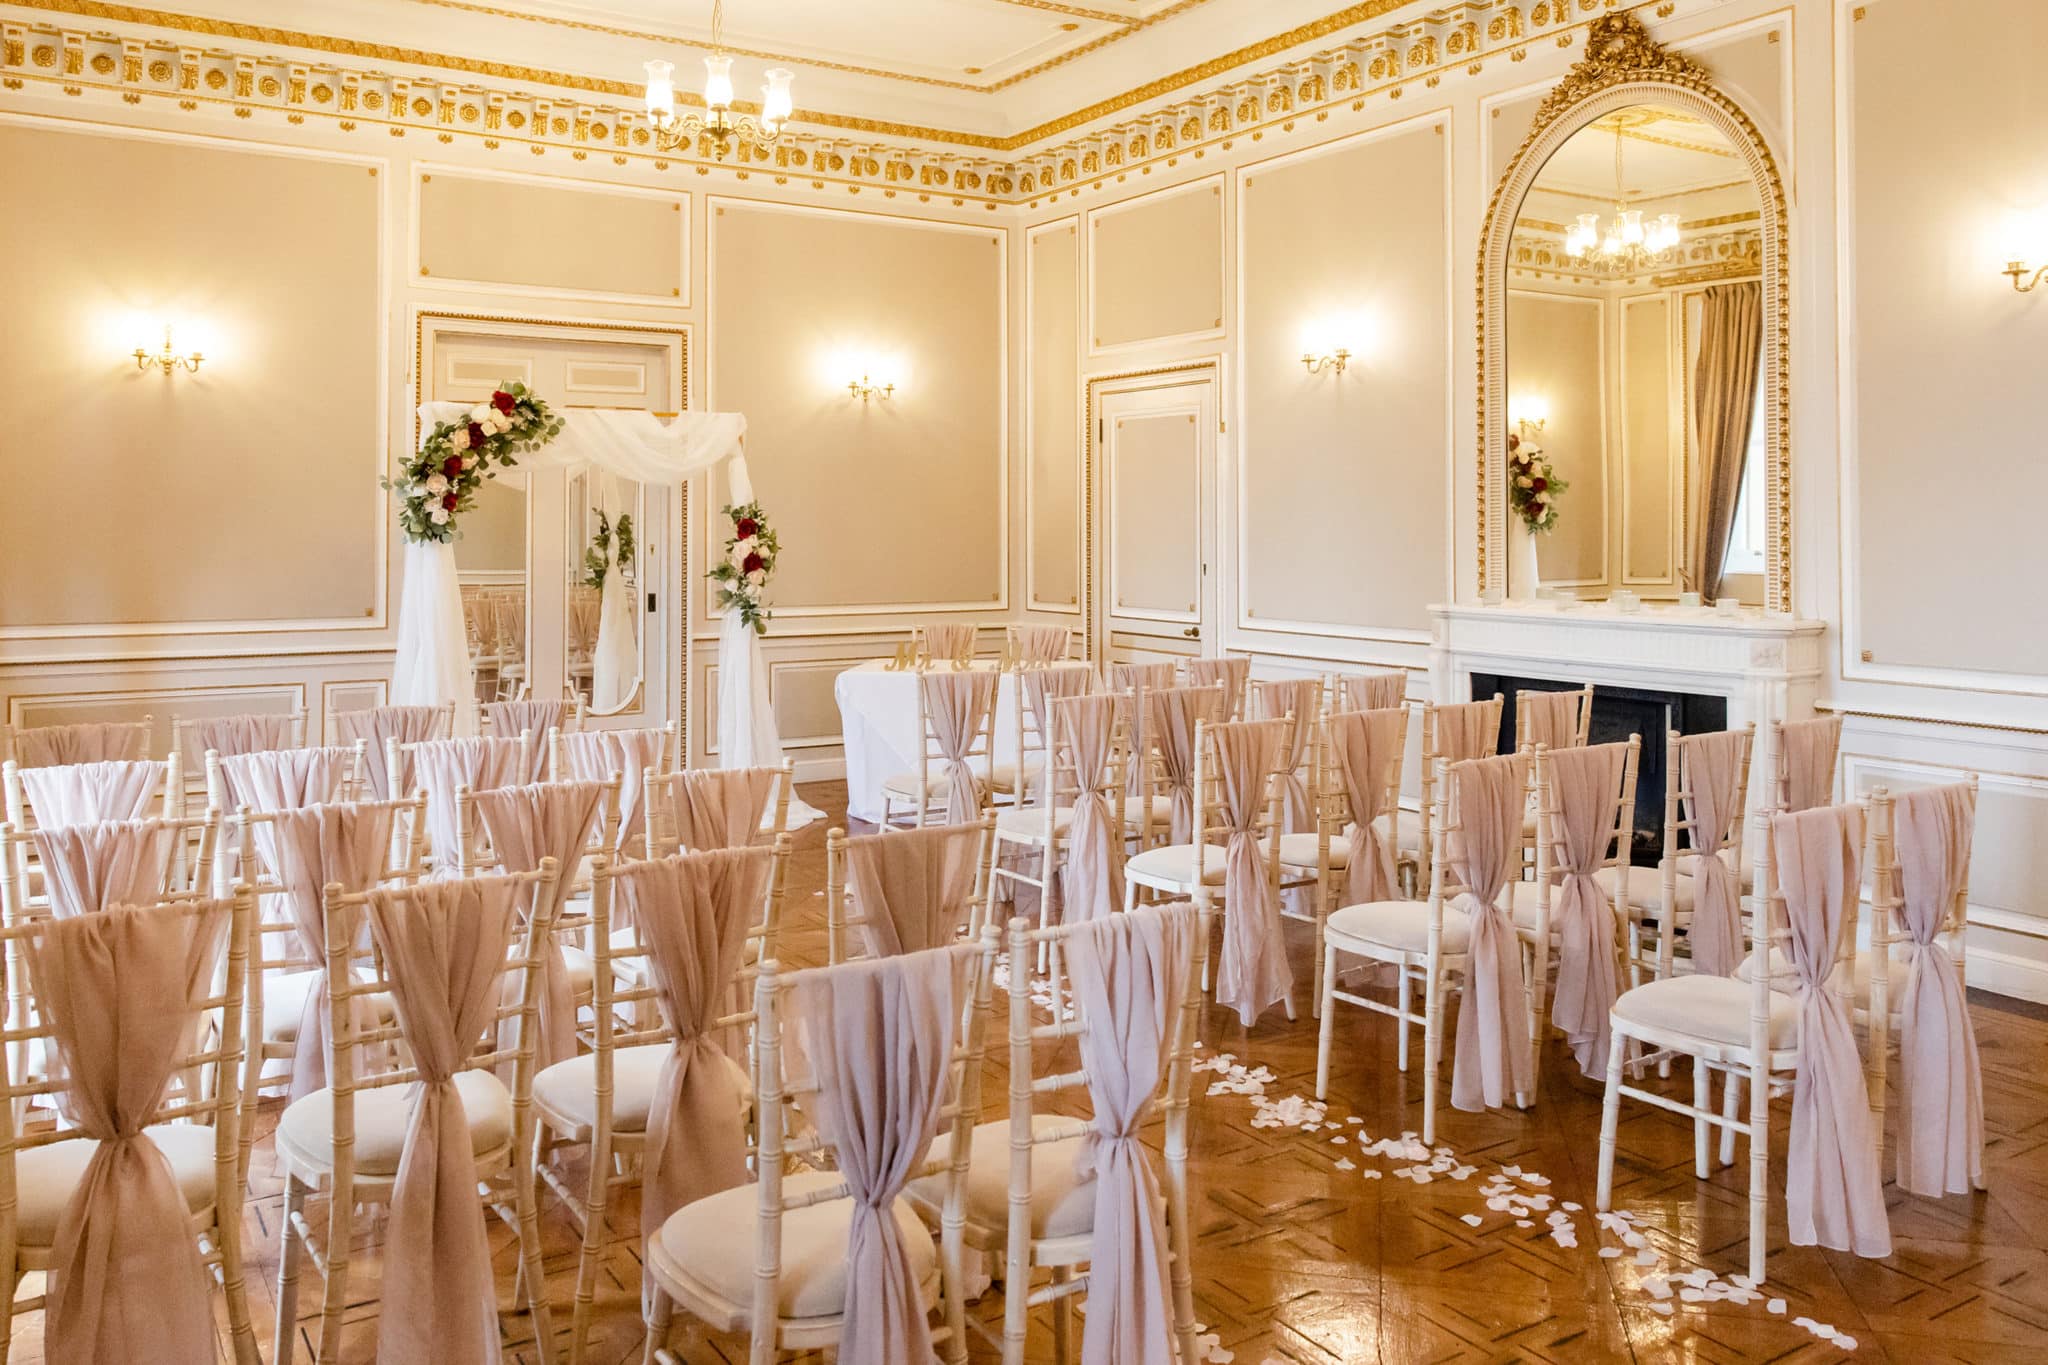 Wedding area with white chairs